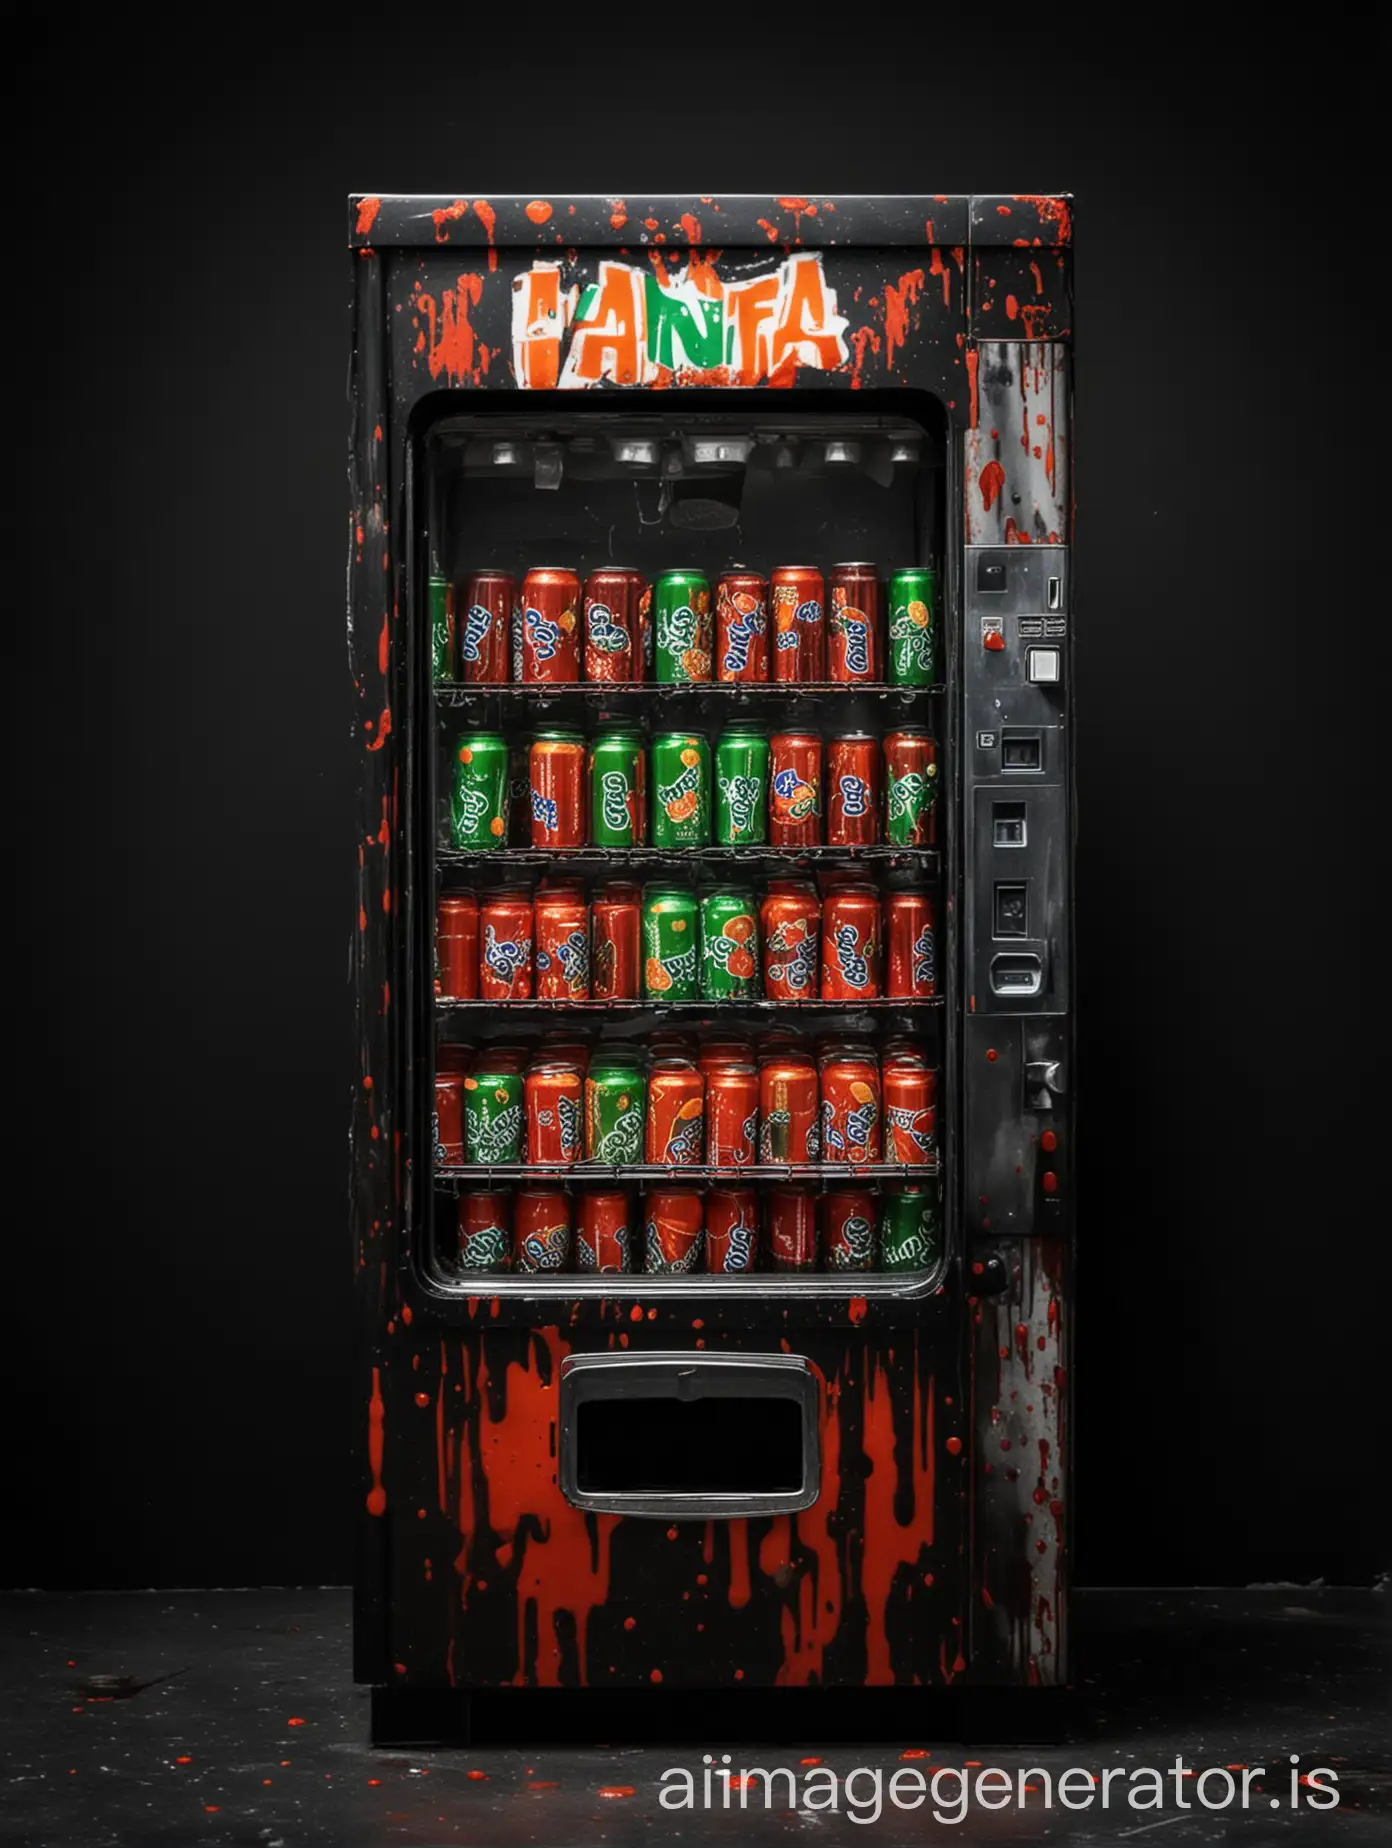 Bloody cans of drinks such as Fanta, Sprite in the vending machine blood is flowing to the places. Dark background. Photoshoot style.